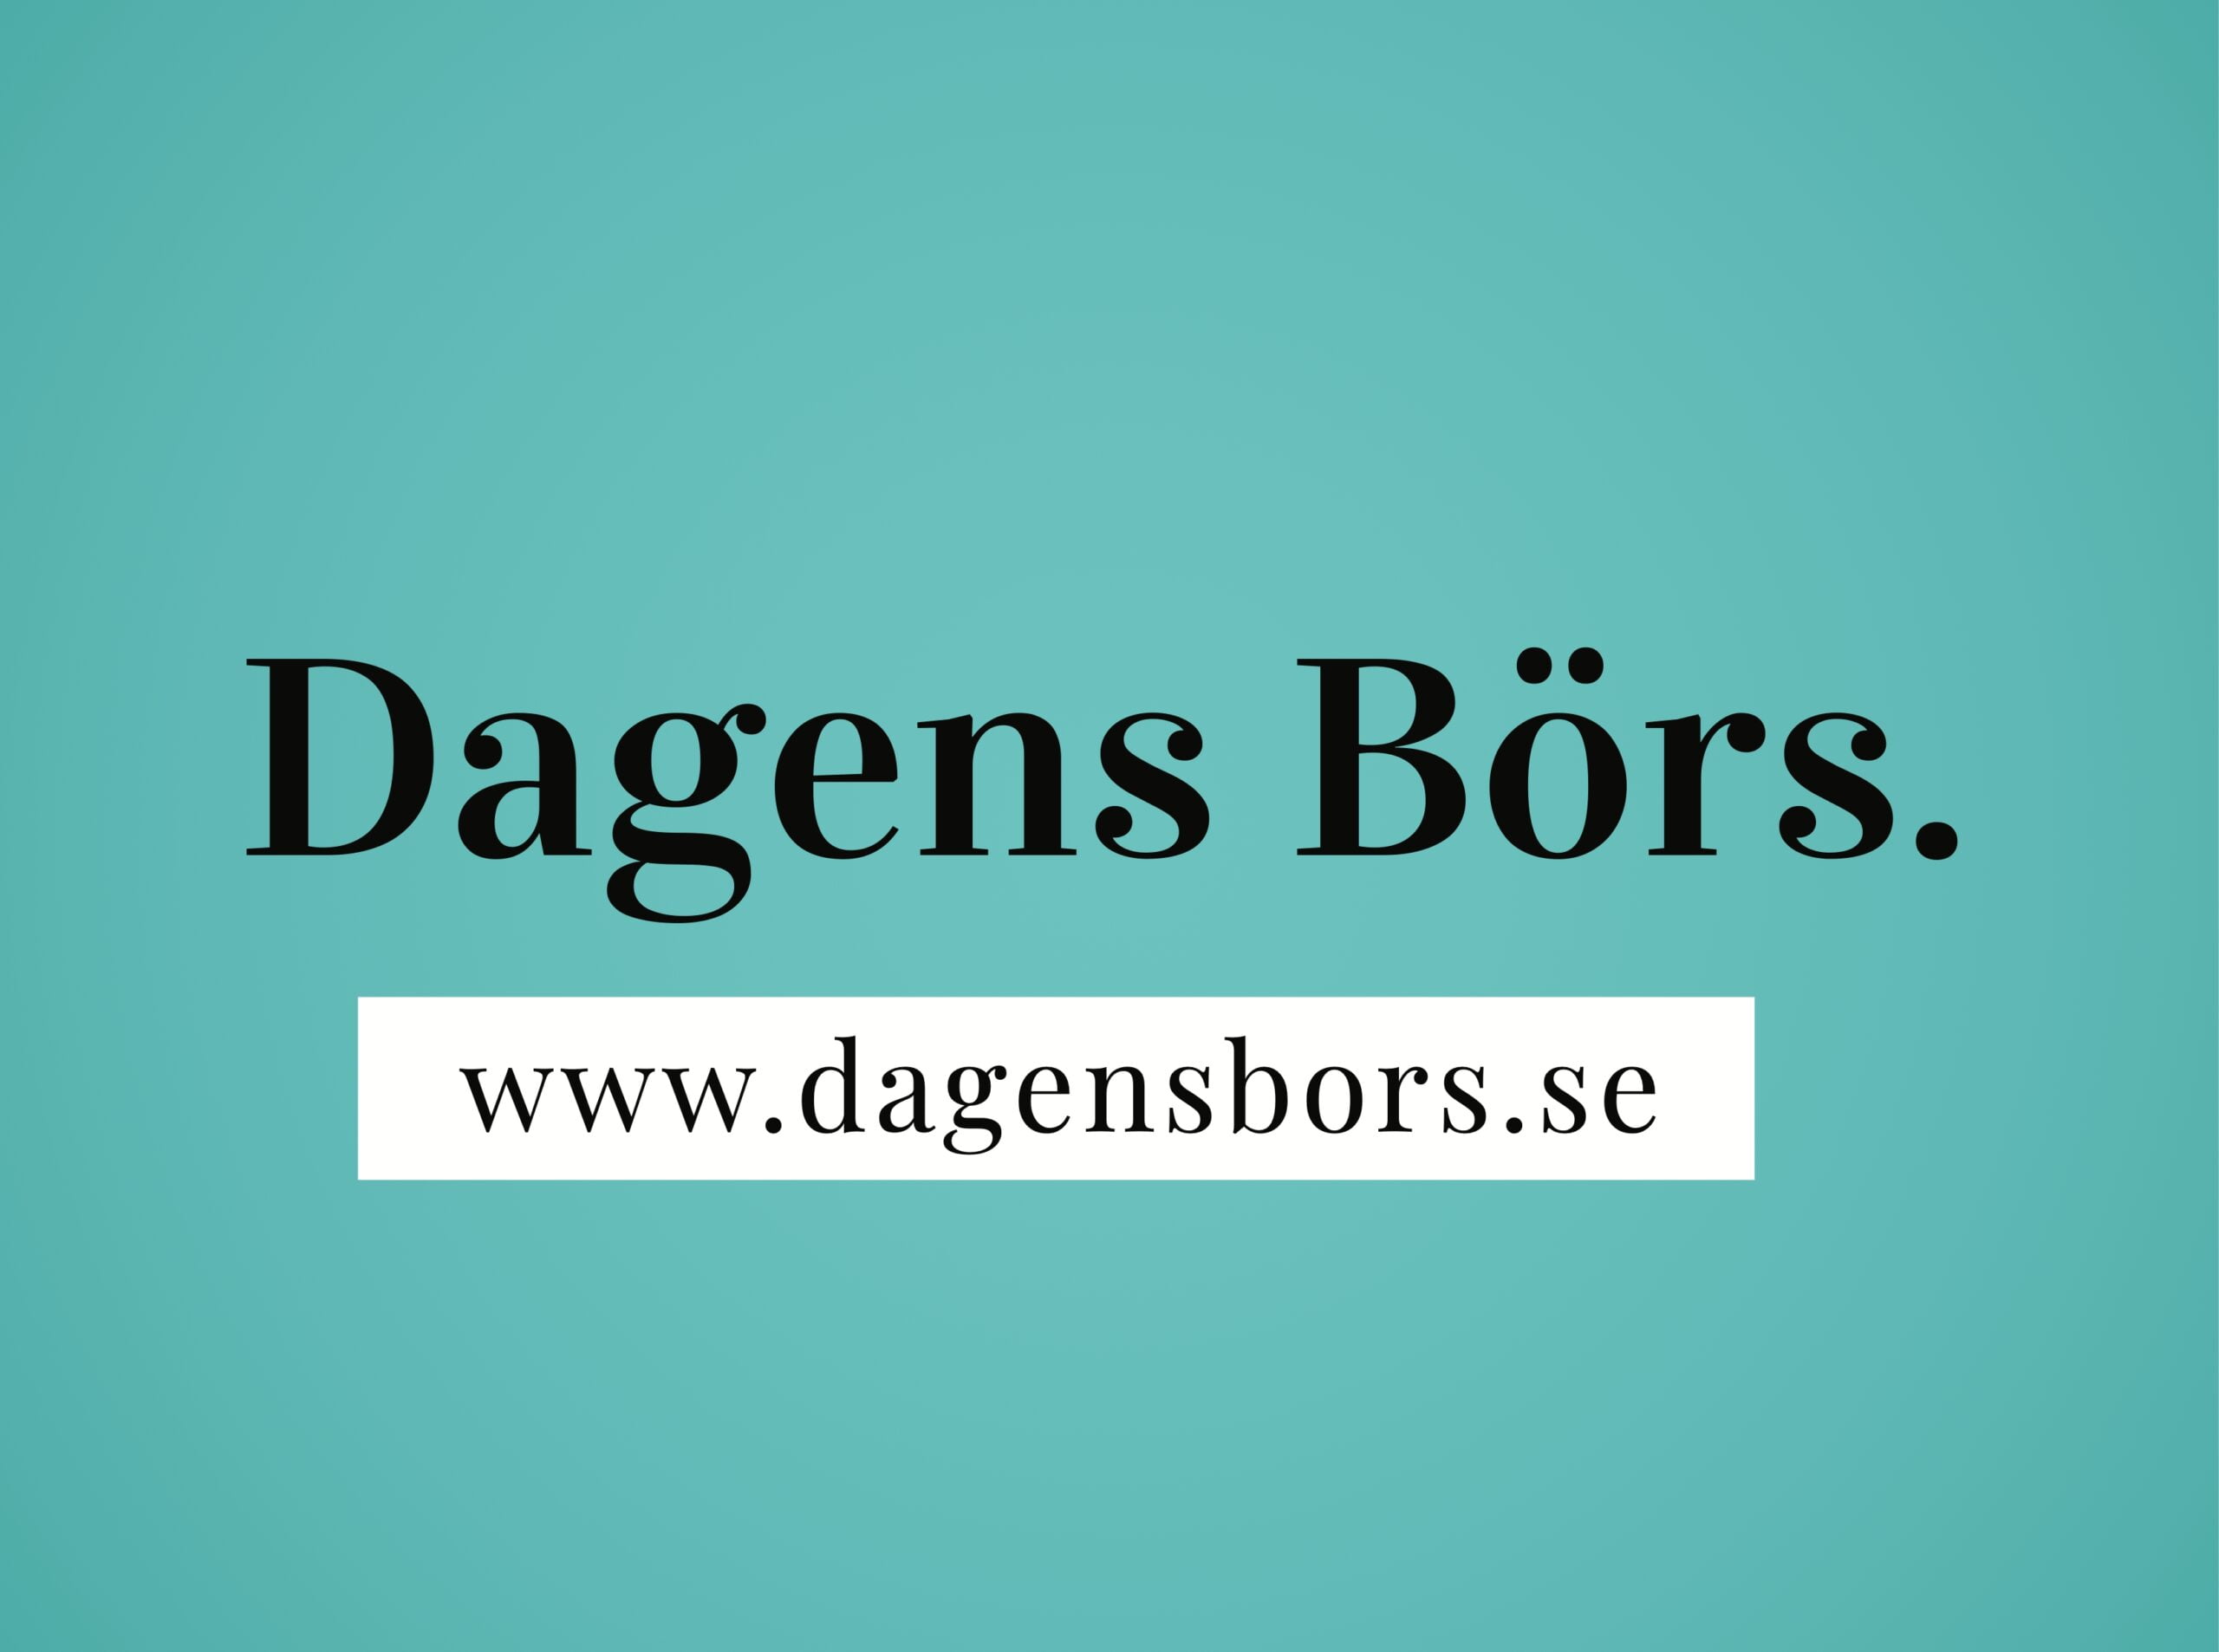 Dagens Börs scaled